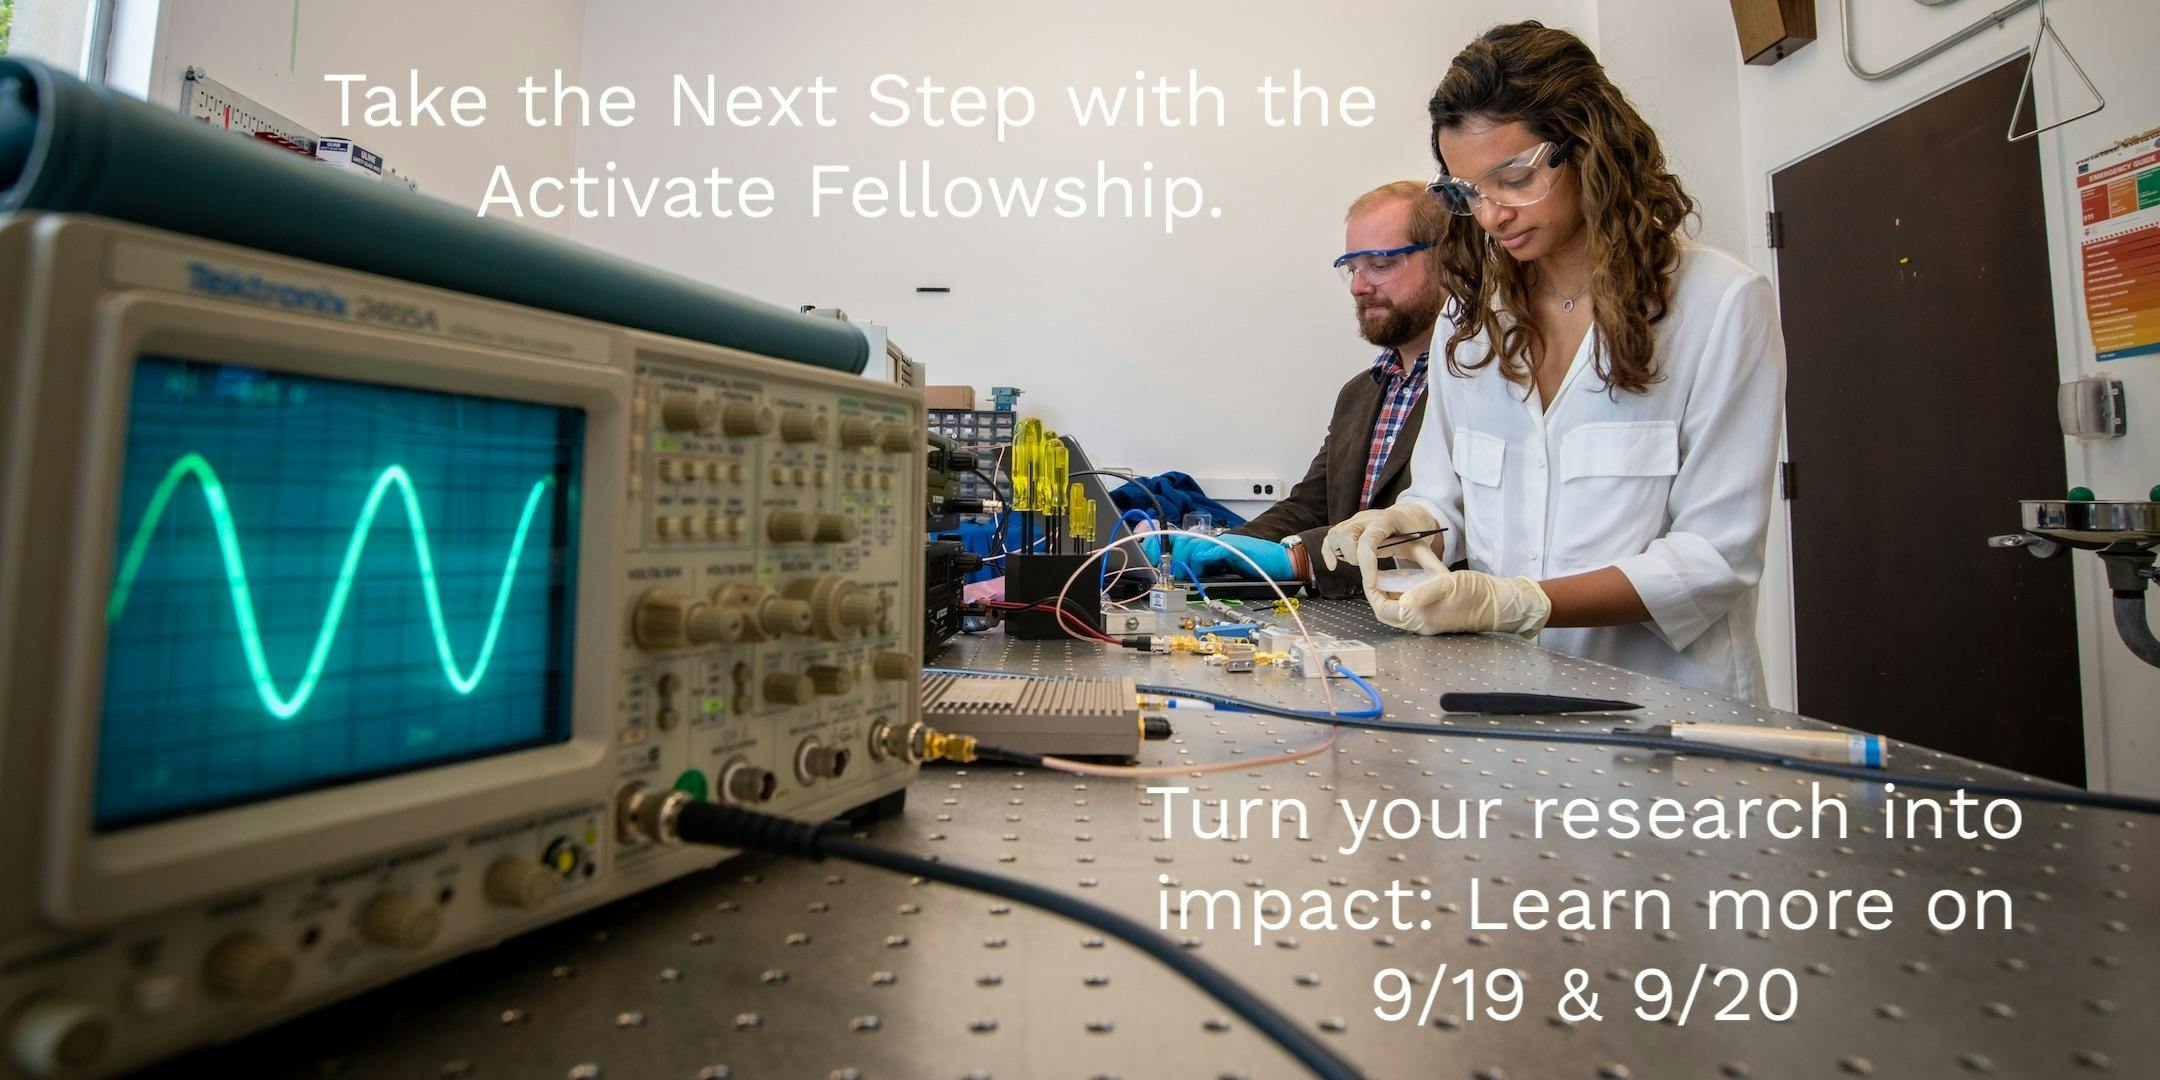 Lunch and Learn: The Activate Fellowship for Entrepreneurial Scientists and Engineers